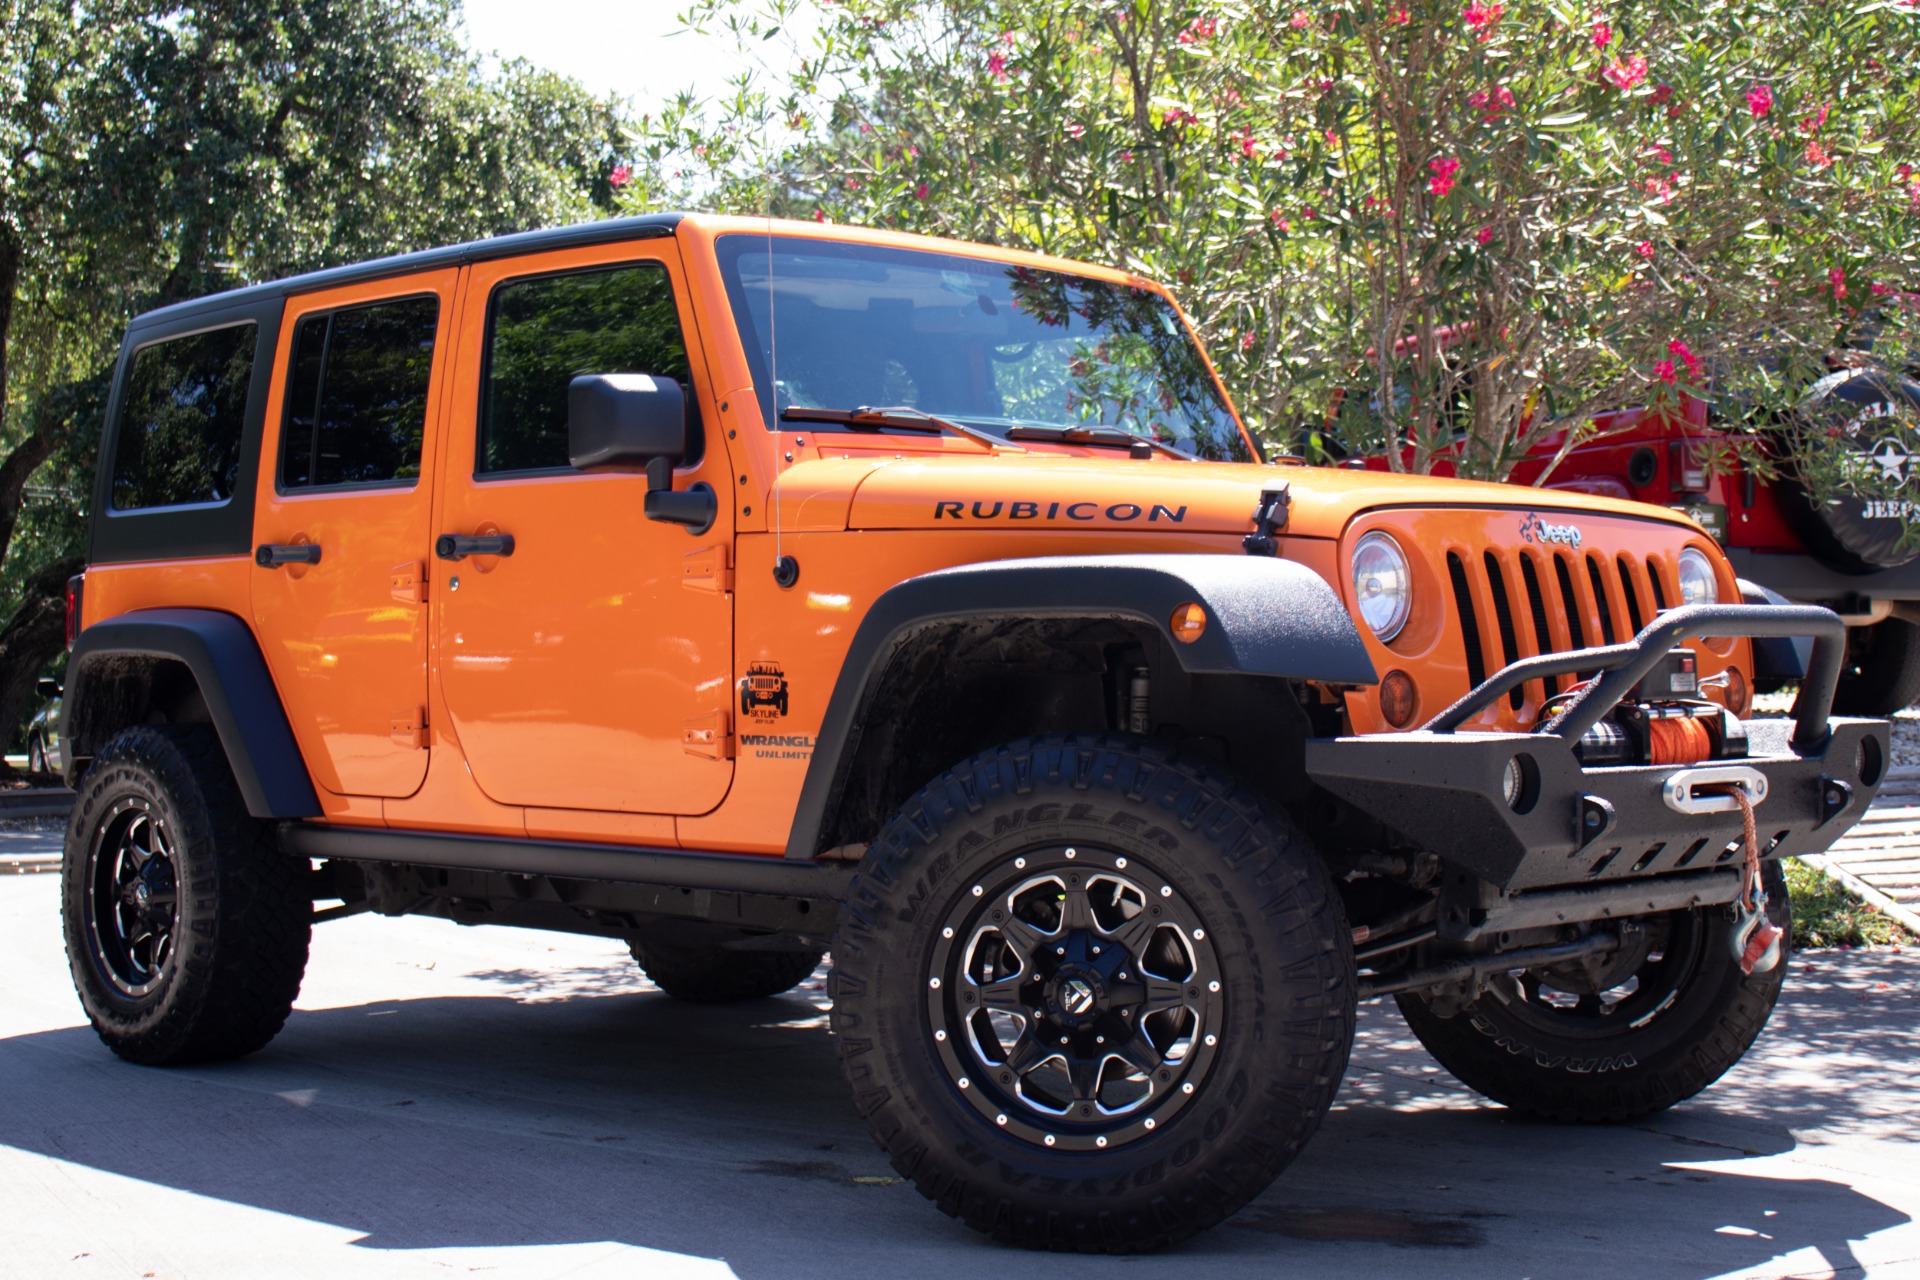 Used 2012 Jeep Wrangler Unlimited Rubicon For Sale 27 995 Select 